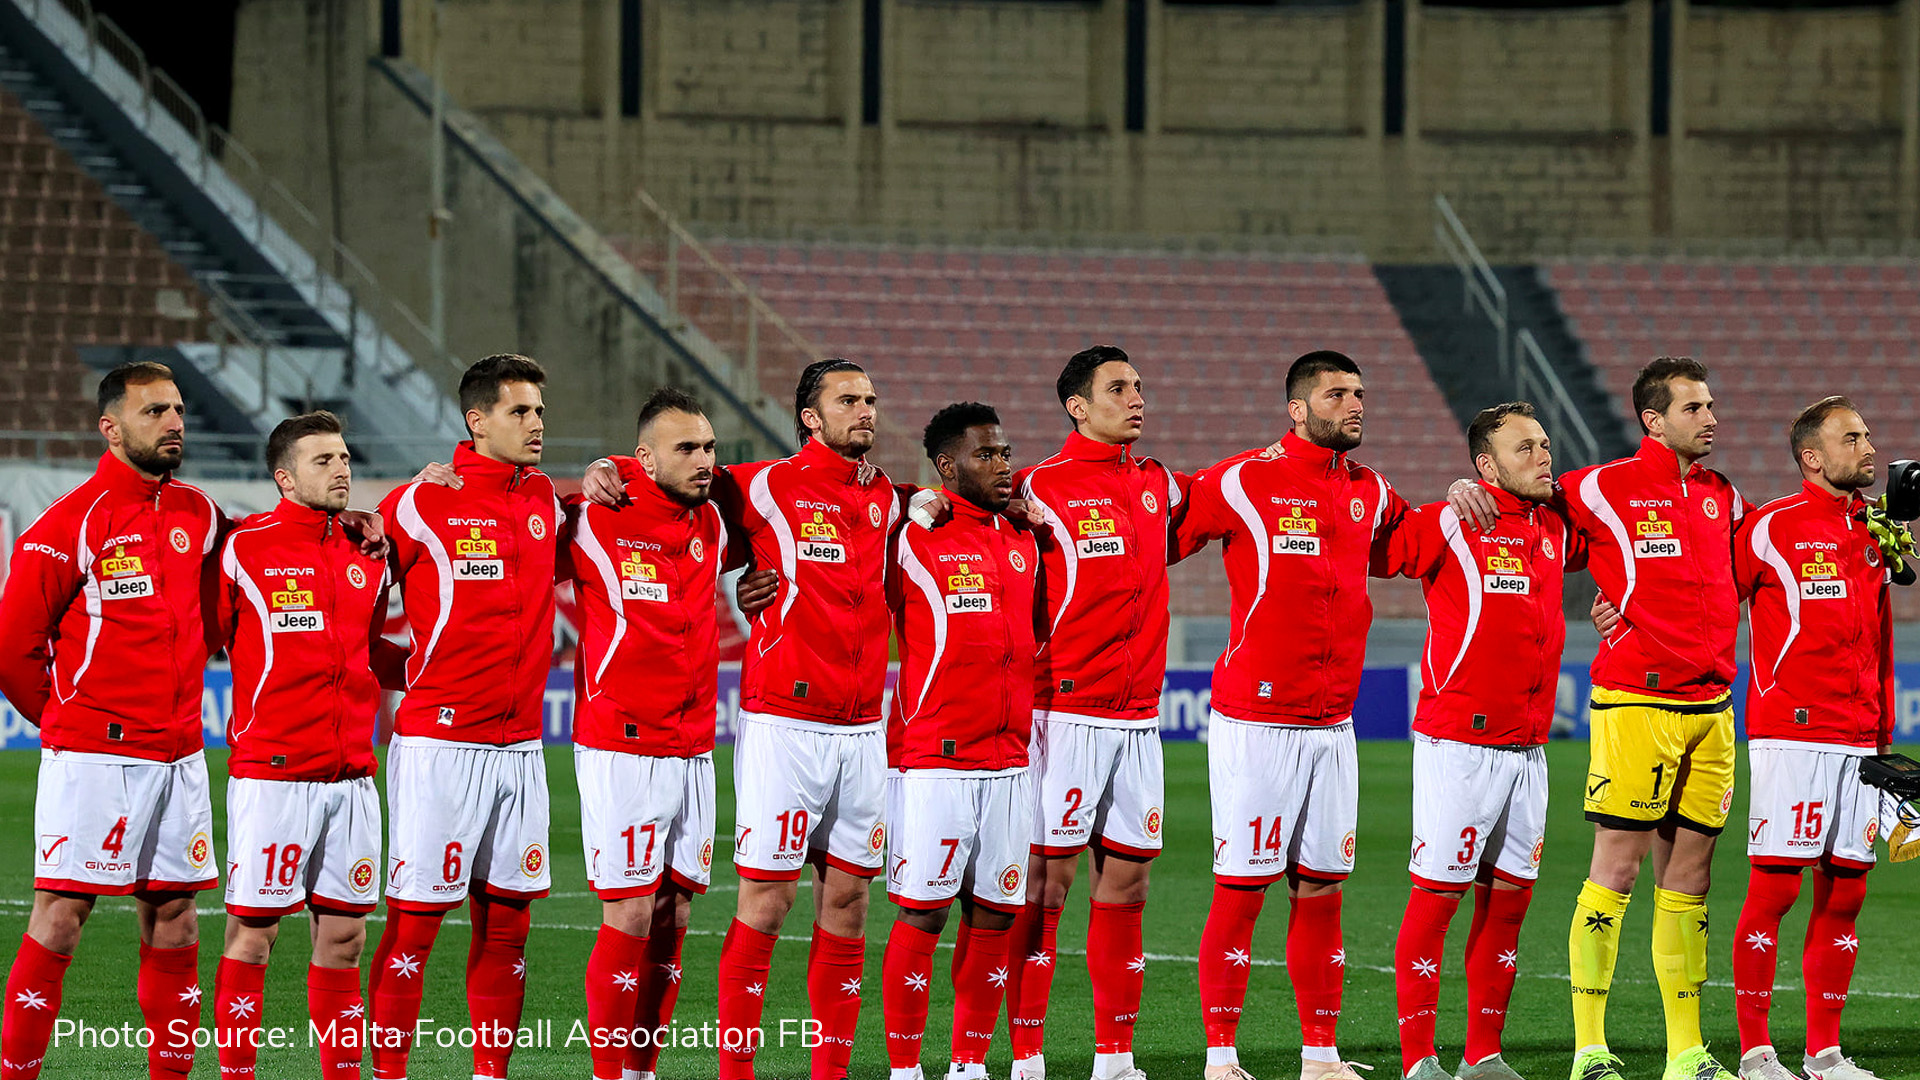 Malta with great performance despite defeat against Russia